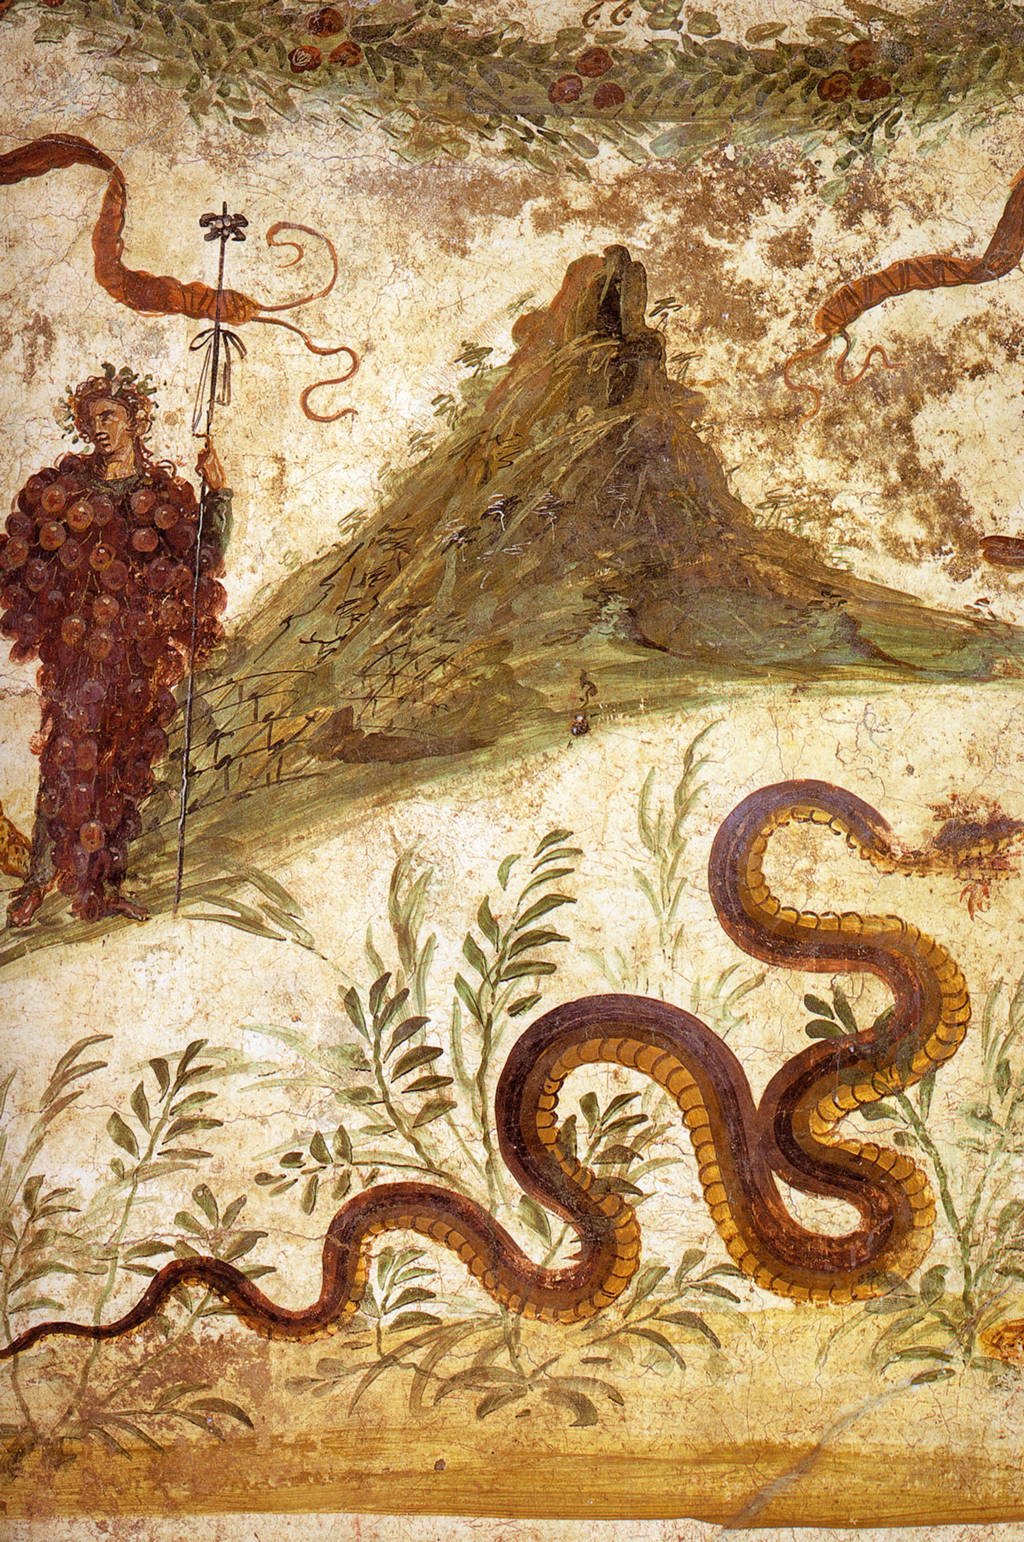 Depiction of Bacchus and Mount Vesuvius without the characteristic crater